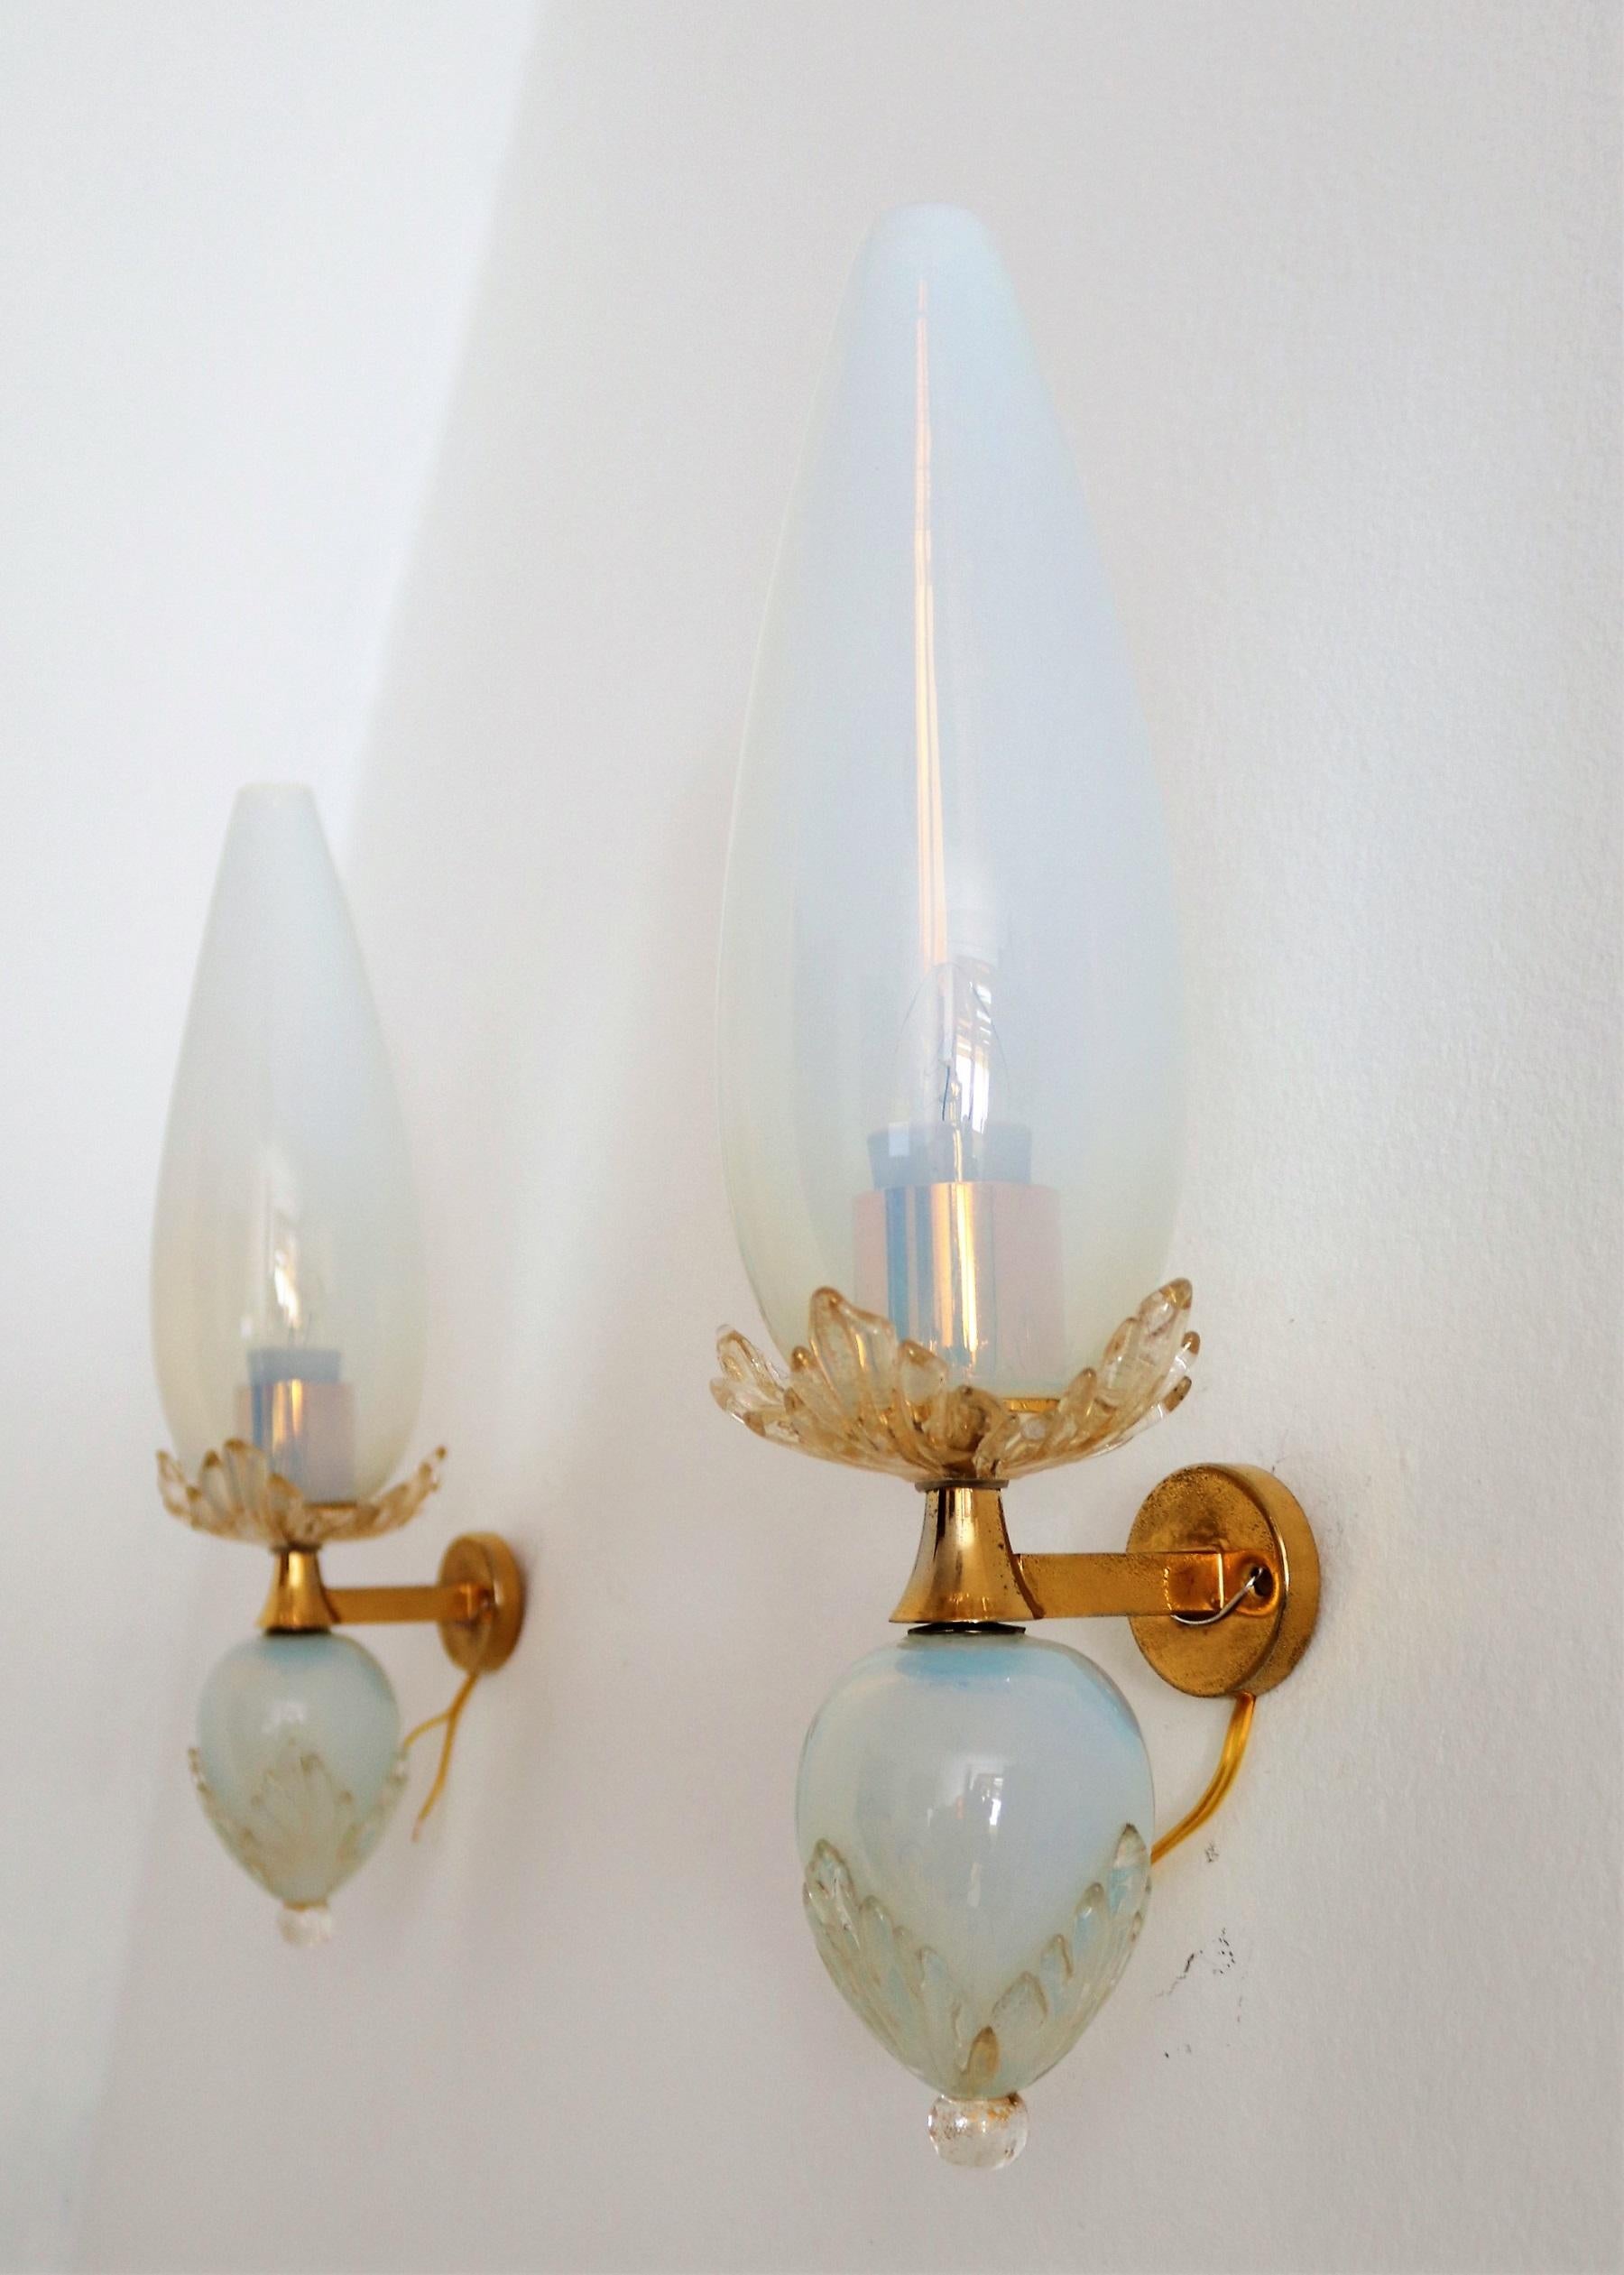 Beautiful pair of wall sconces made by Venini, Murano, Italy in the 1970s.
All glass parts are handcrafted and made of opalescent shiny Murano glass of stunning quality.
Difficult to photograph, much better in person that on the pictures.
The